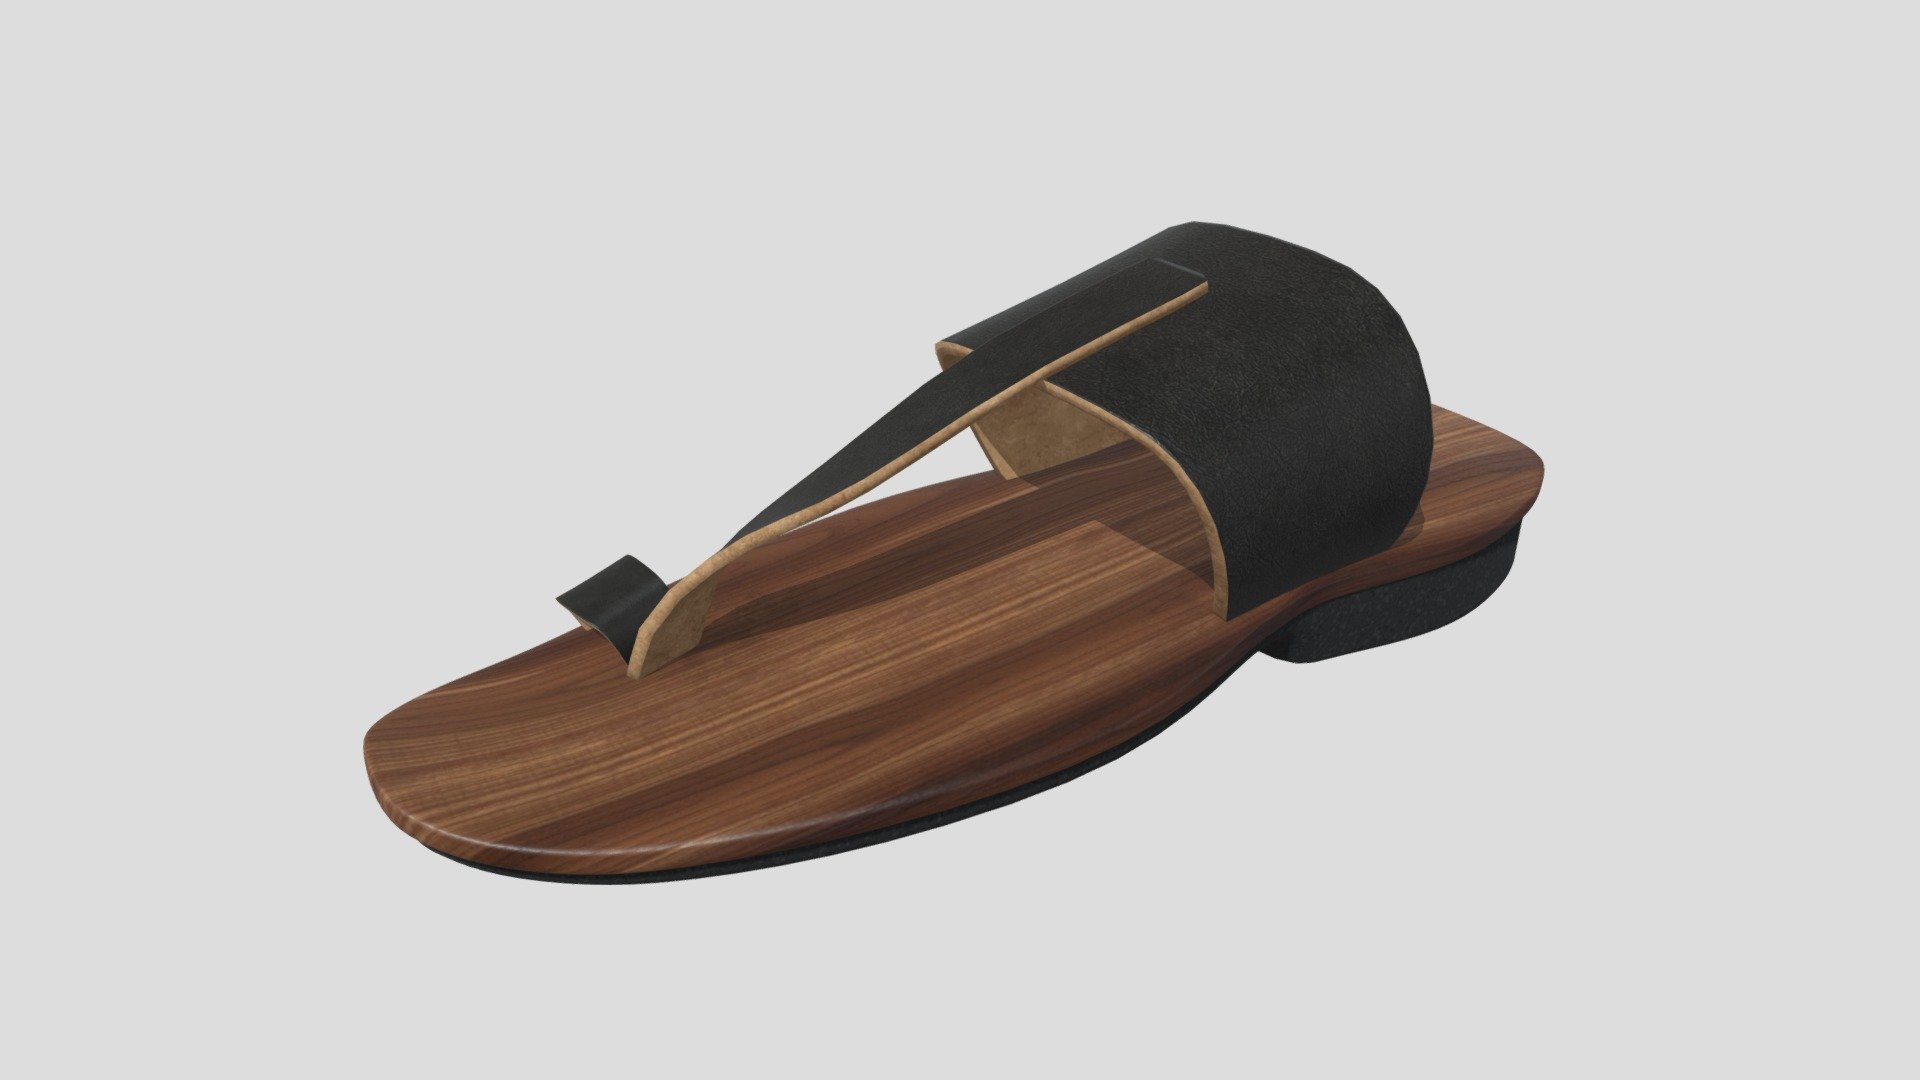 Low-poly leather and wooden sandal made with Blender - Black leather & wooden sandal - 3D model by lexmcnevan 3d model